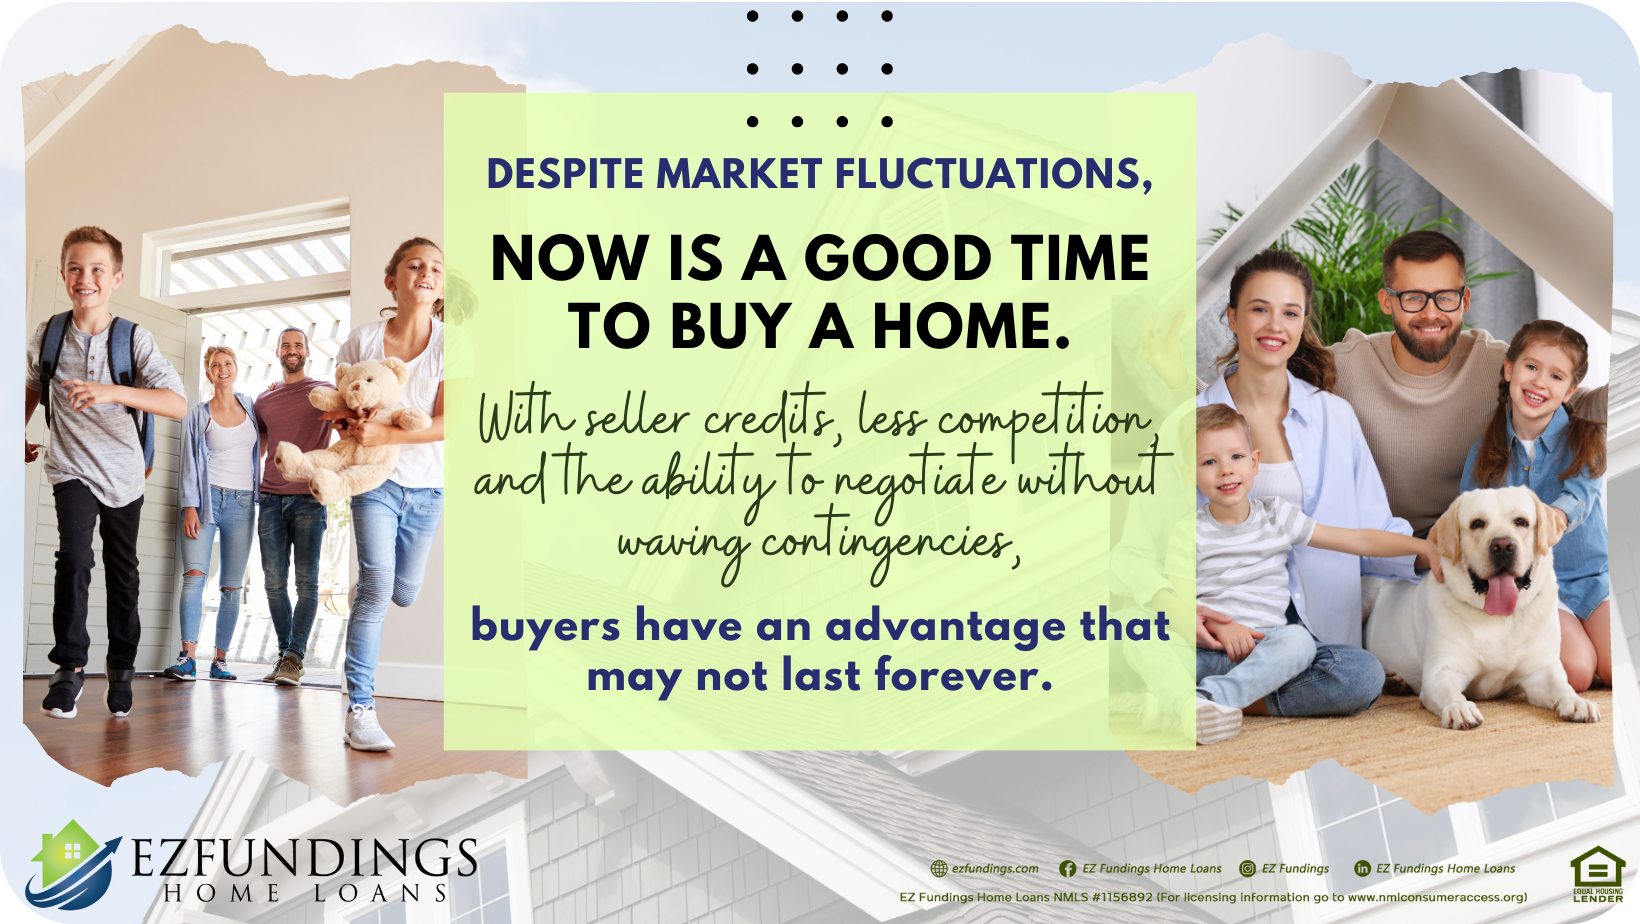 A photo collage of families who have taken advantage of the time in buying a home. It is stated in the photo: "Despite market fluctuations, now is a good time to buy a home. With seller credits, less competition, and the ability to negotiate without waving contingencies, buyers have an advantage that may not last forever.